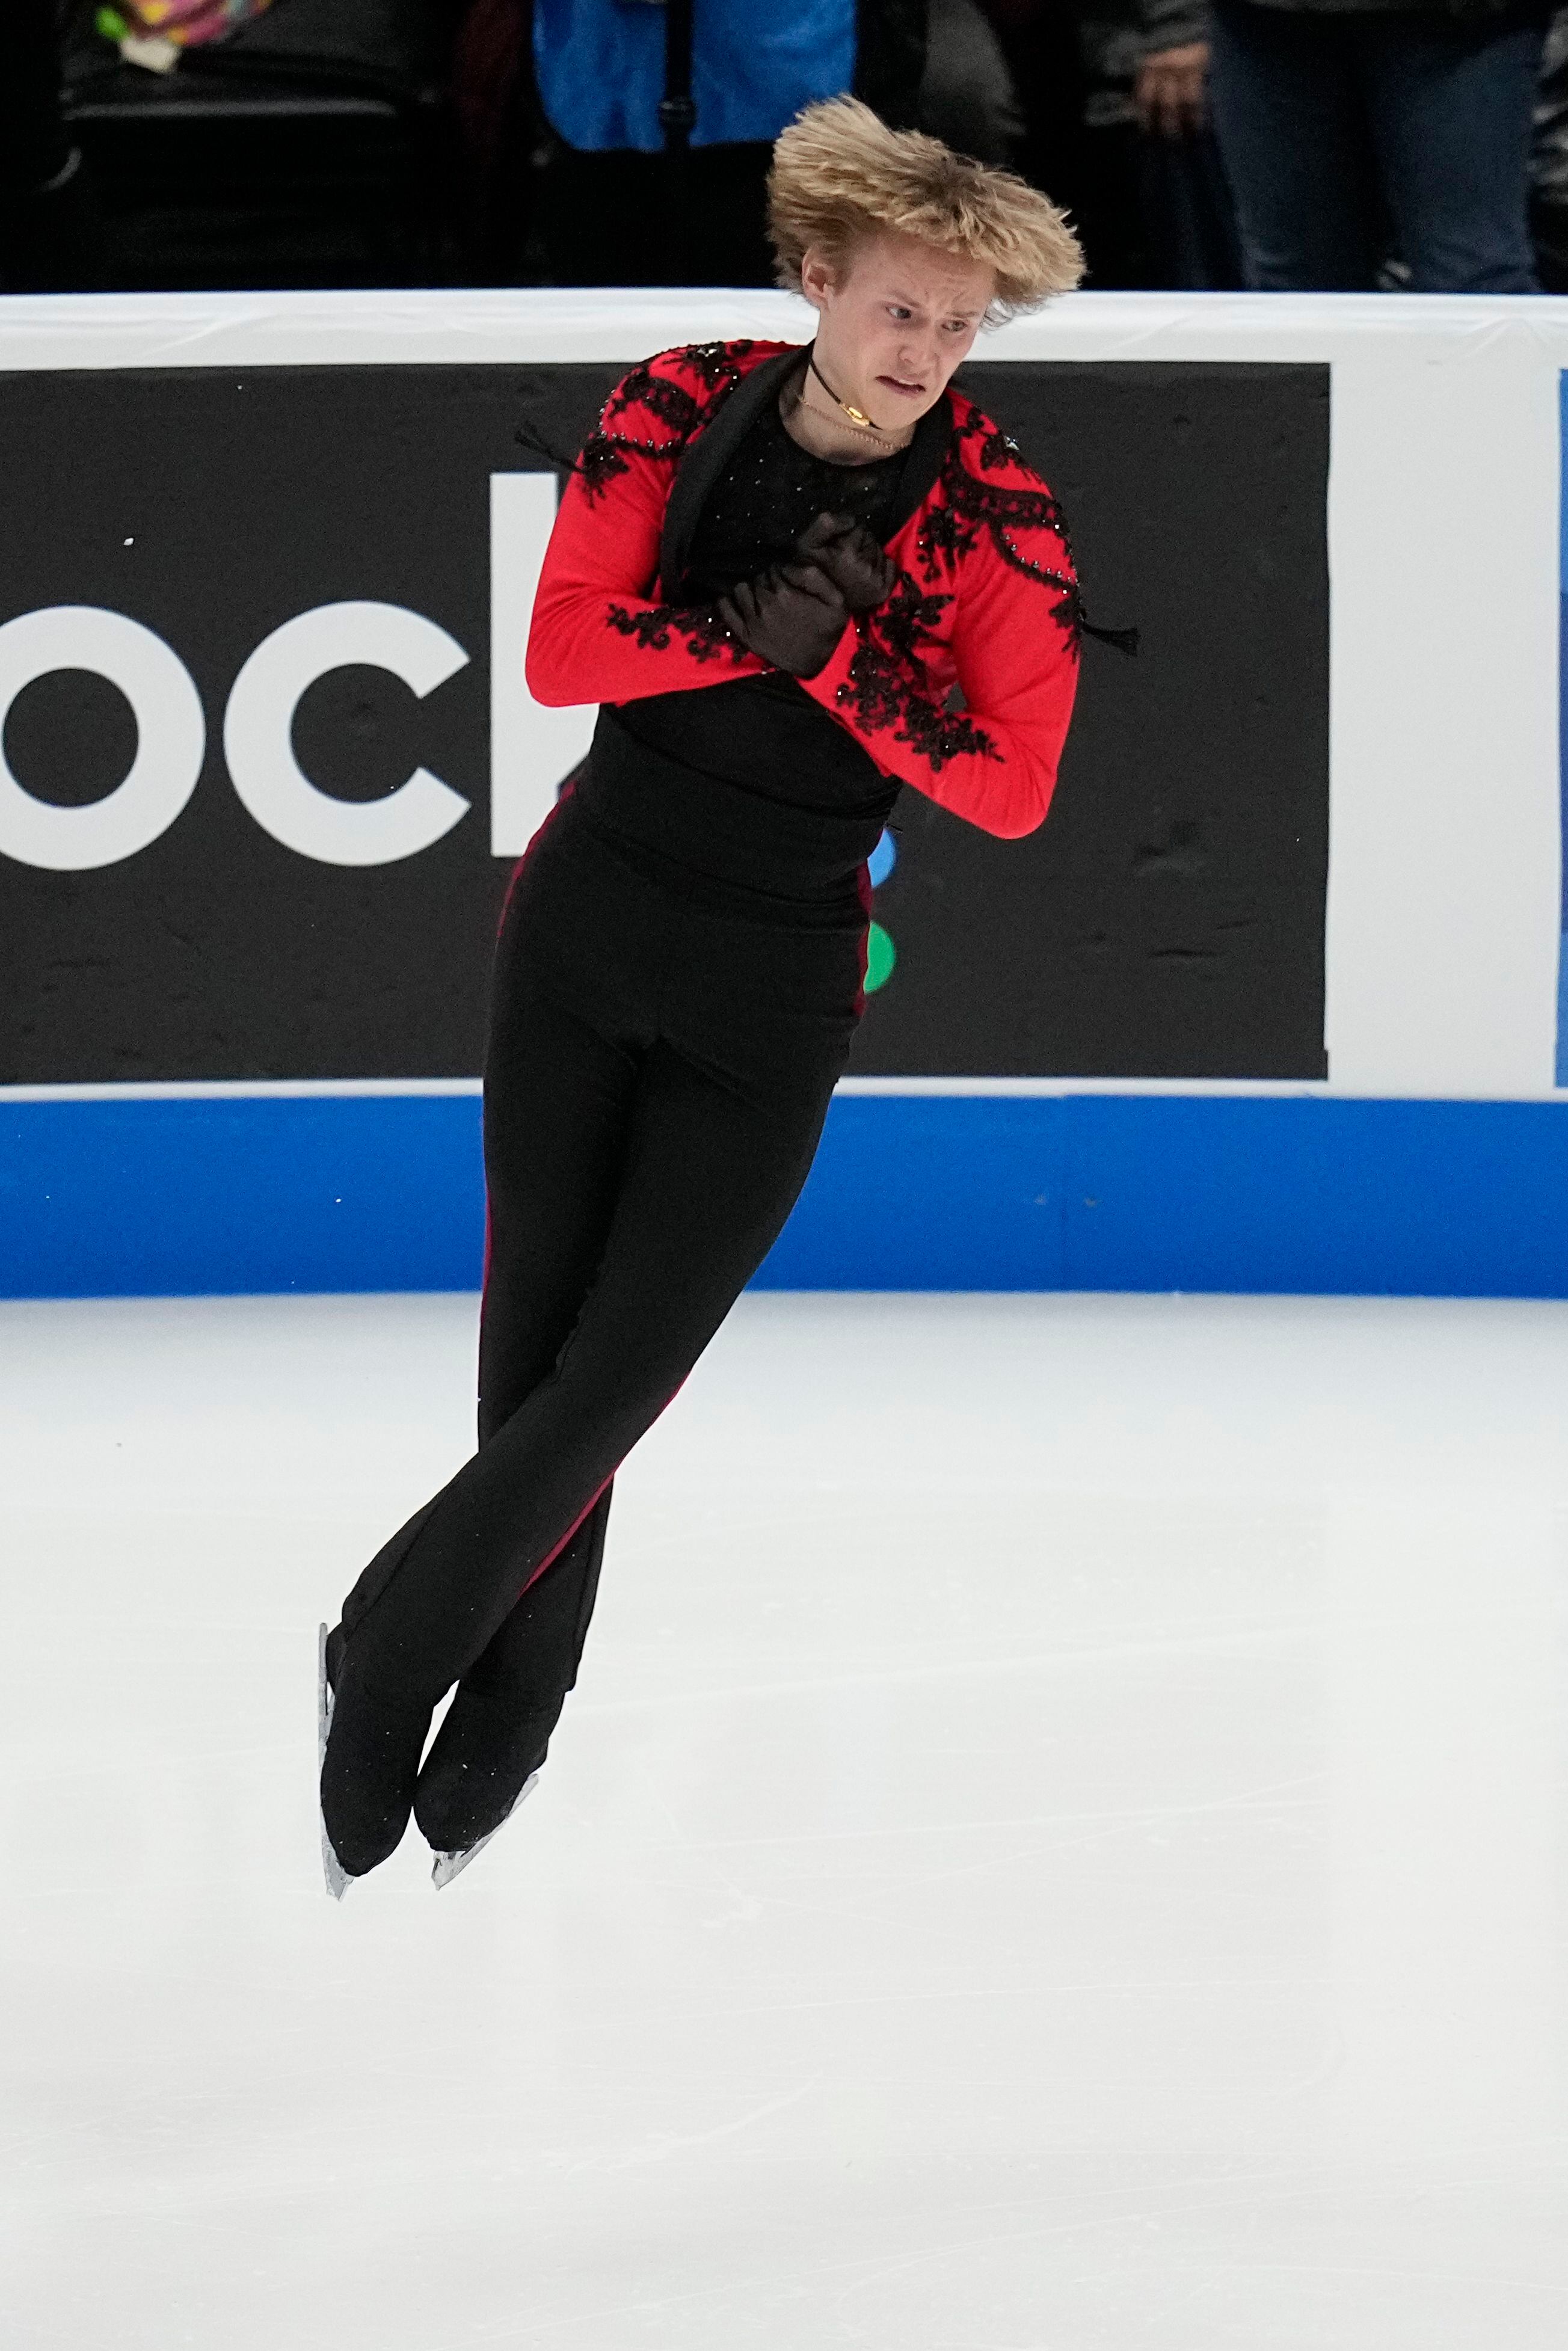 Isabeau Levito BARELY holds off Amber Glenn for lead in US Nationals short  program